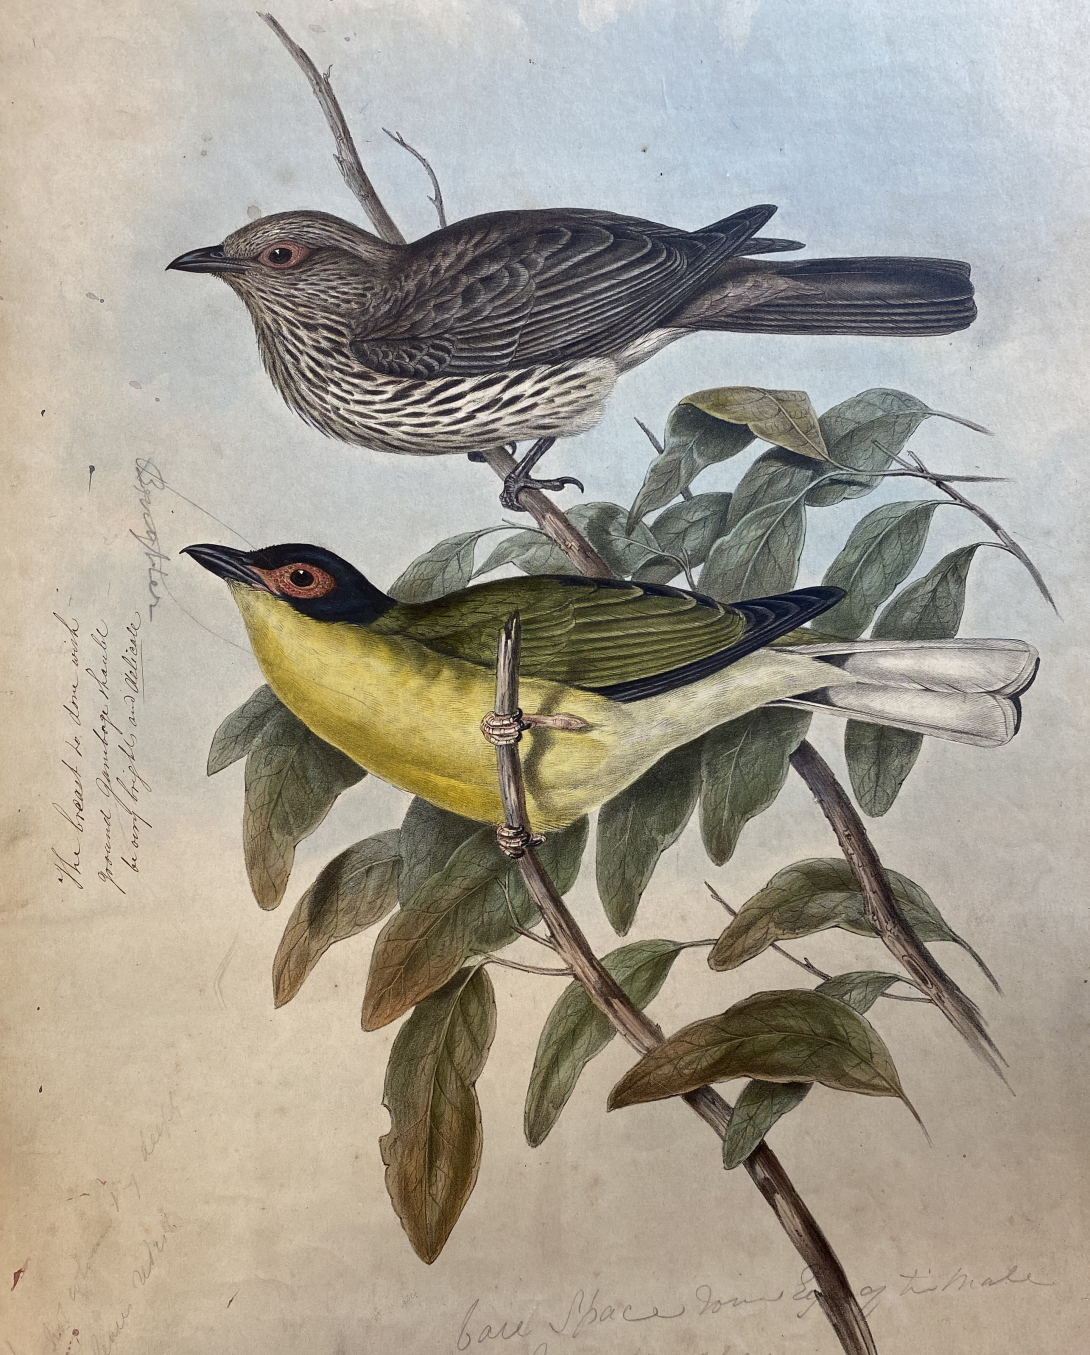 A coloured illustration of two birds standing on small branches, one above the other, leaves sketched behind them and some illegible cursive handwriting to the side.